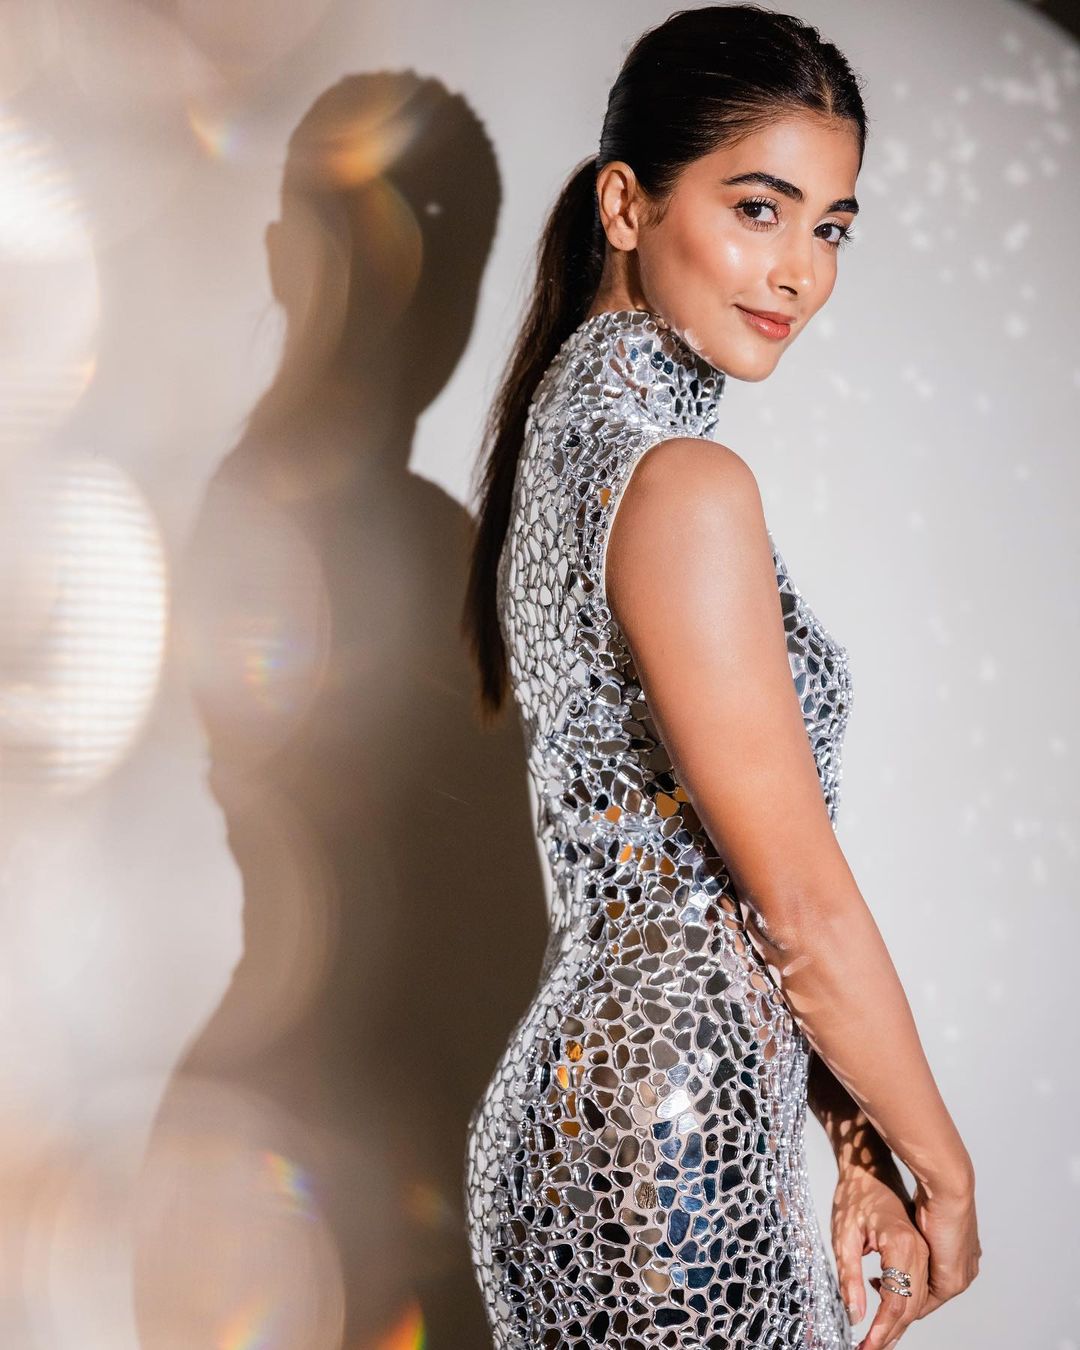 Pooja Hegde keeps her hair tied into a neat ponytail with the flamboyant outfit